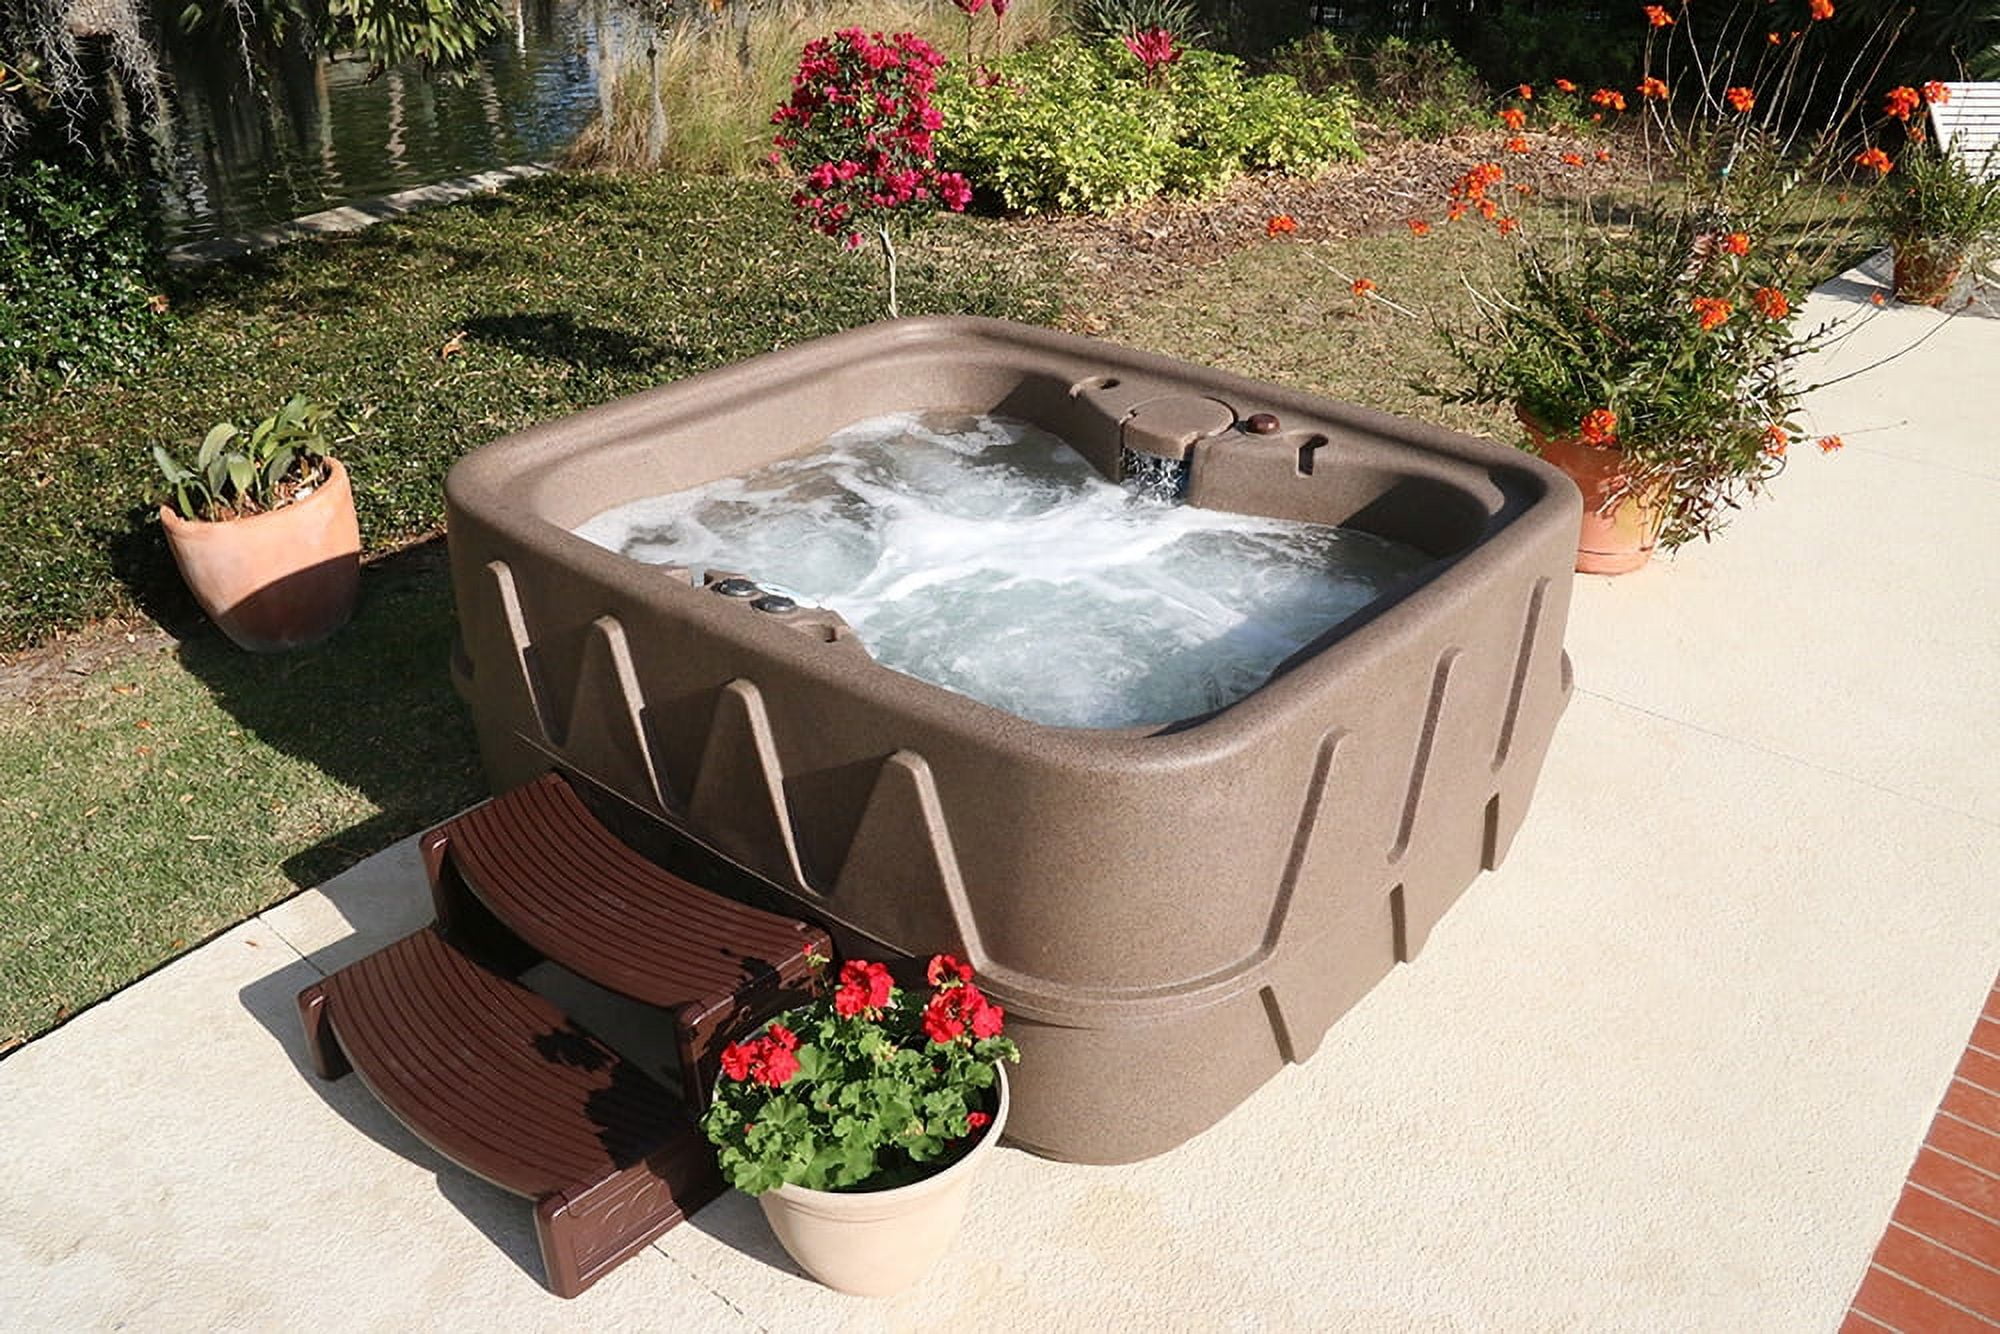 Aquarest Spas Powered By Jacuzzi® Pumps Ar 400 Select 4 Person 20 Jet Plug And Play Hot Tub